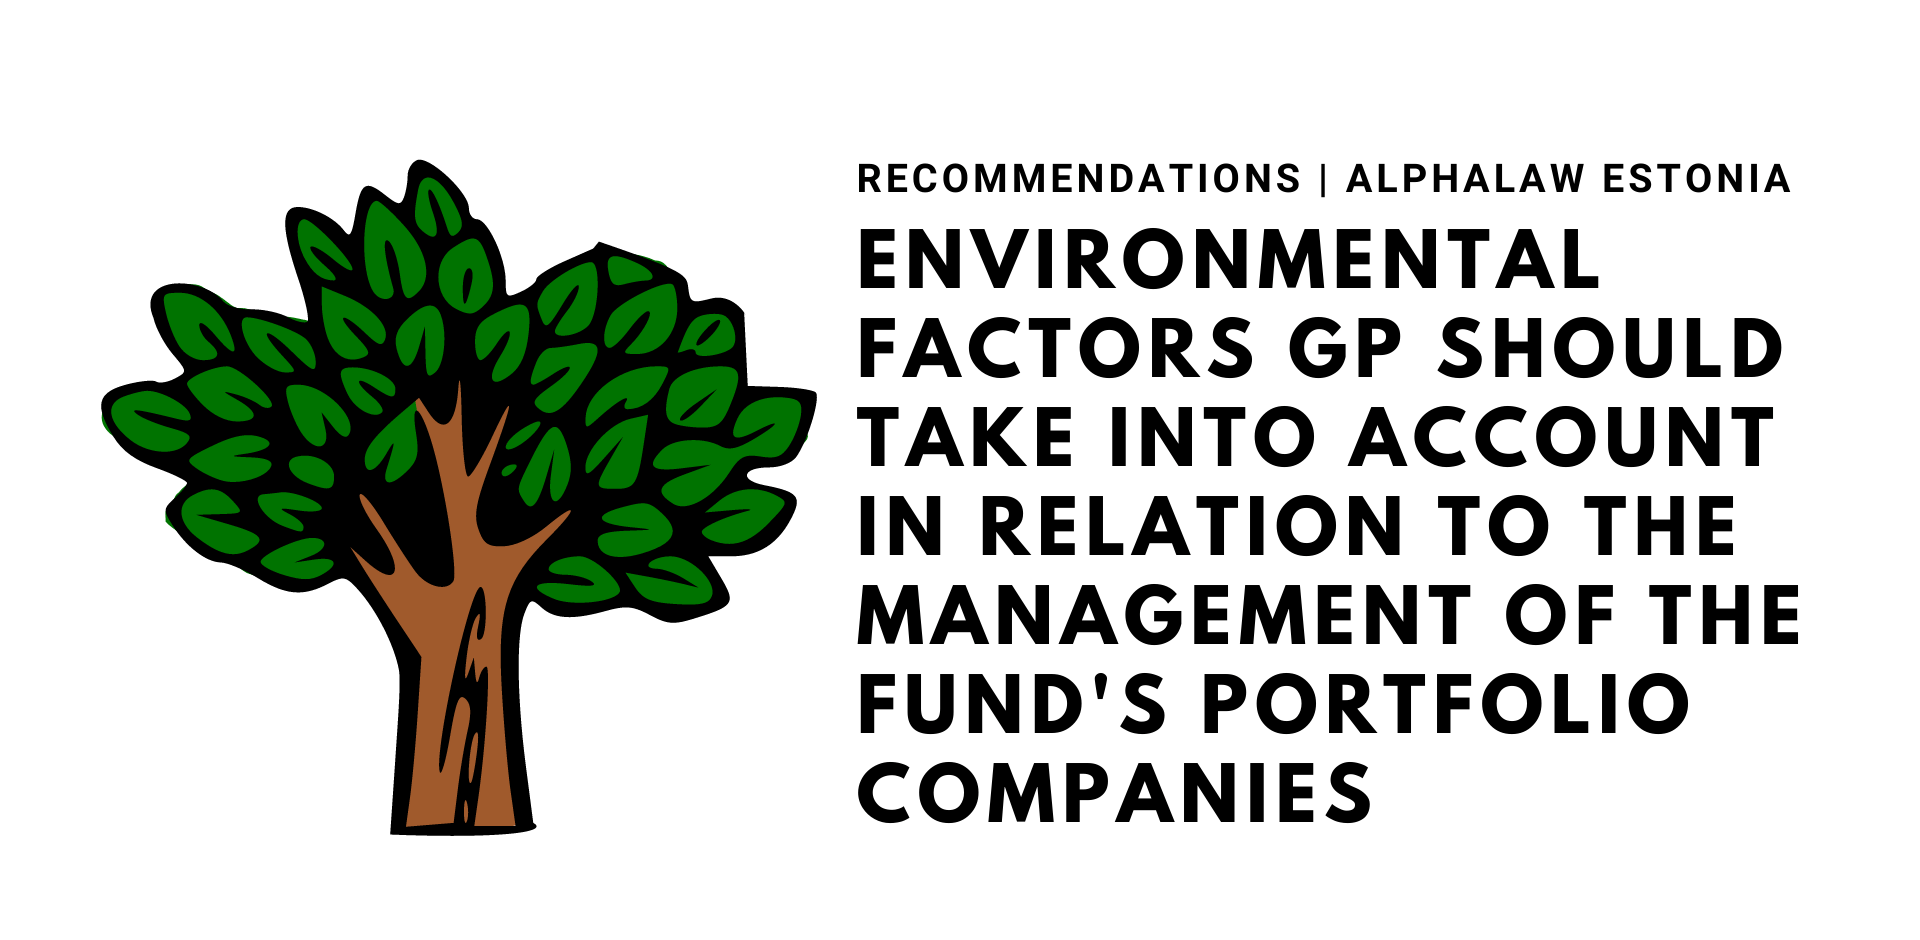 Environmental Factors GP Should Take Into Account in Relation to the Management of the Fund's Portfolio Companies